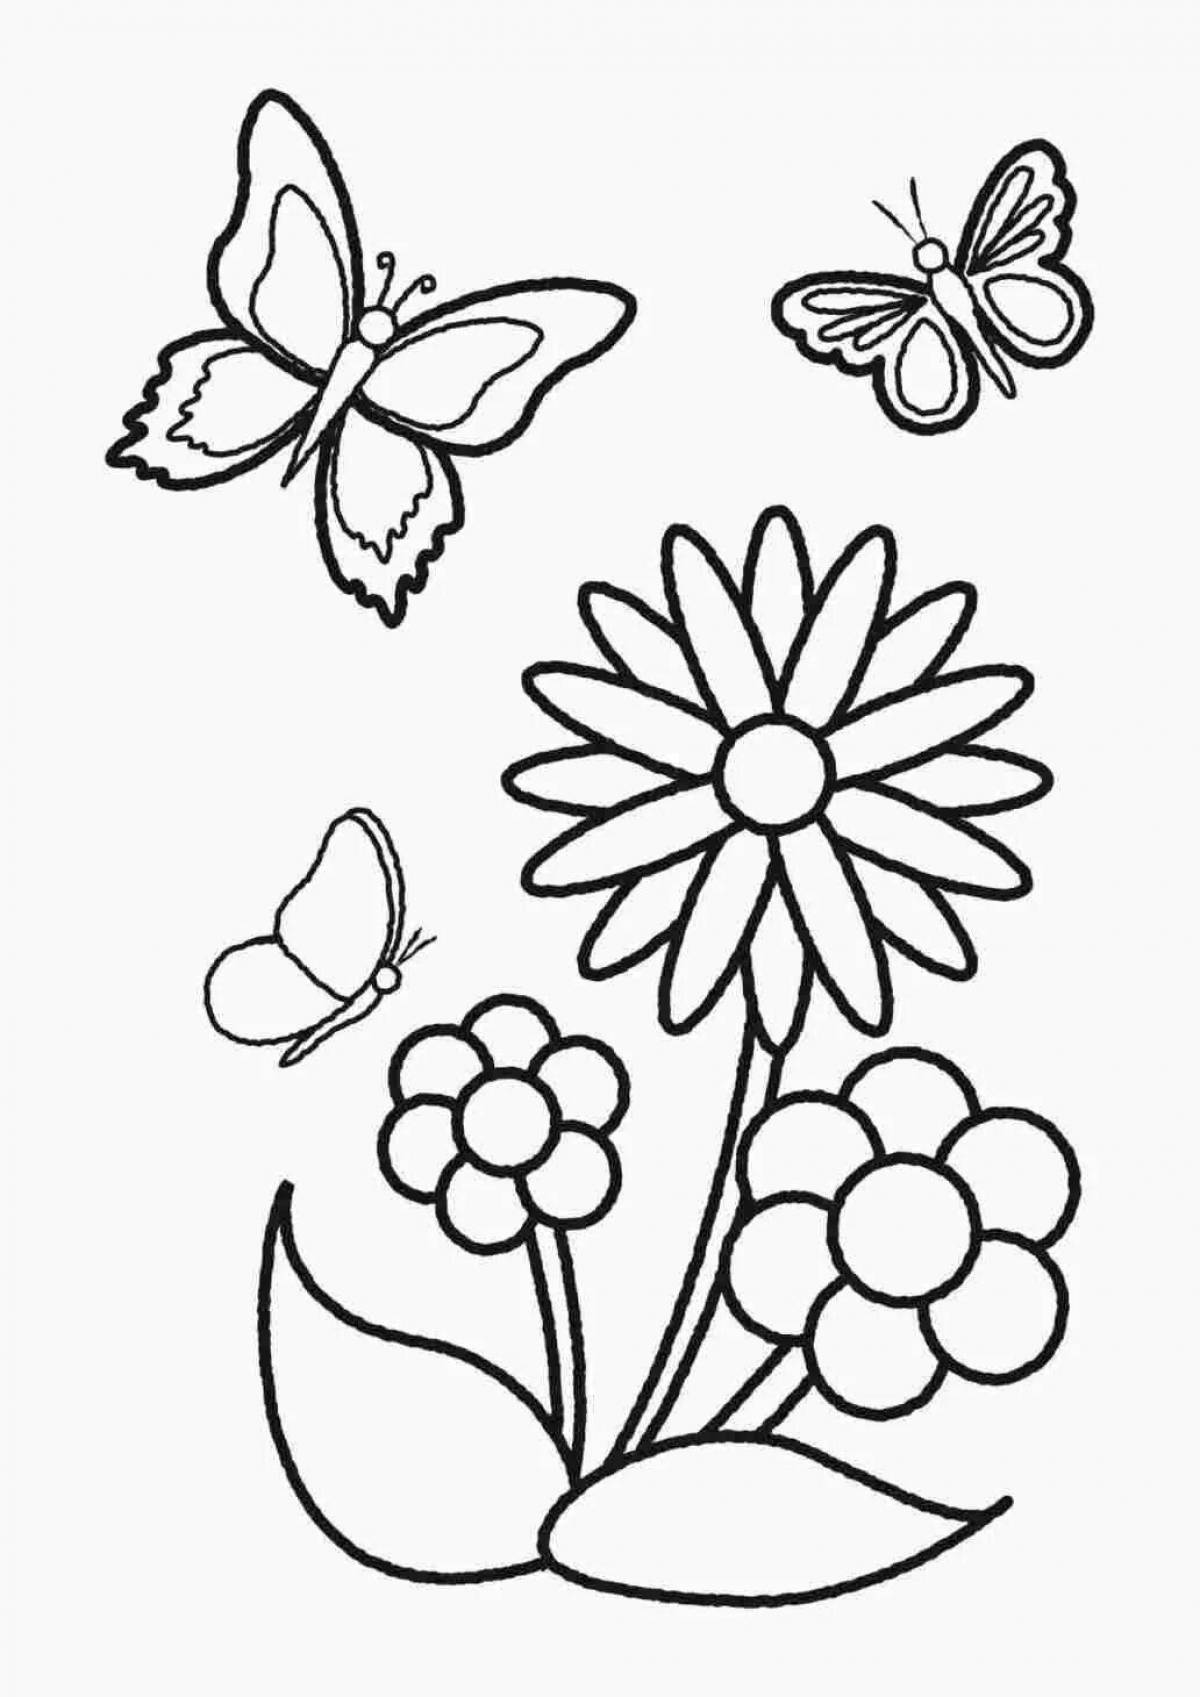 Radiant coloring page girls flower